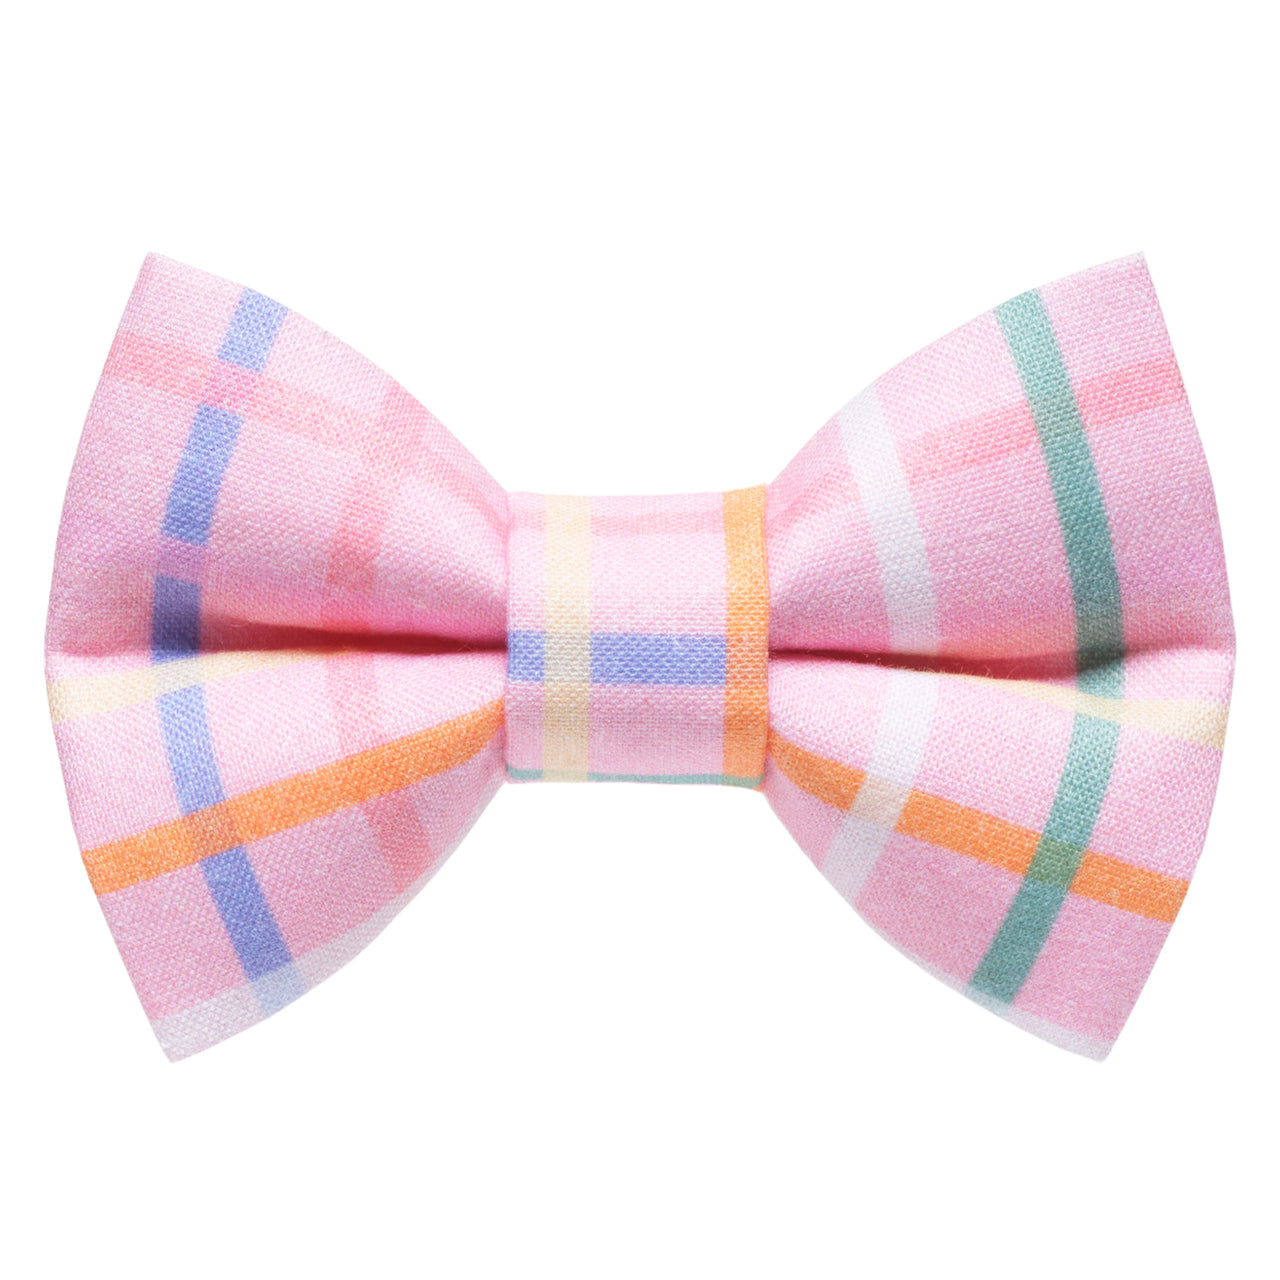 The It's Casual - Cat / Dog Bow Tie